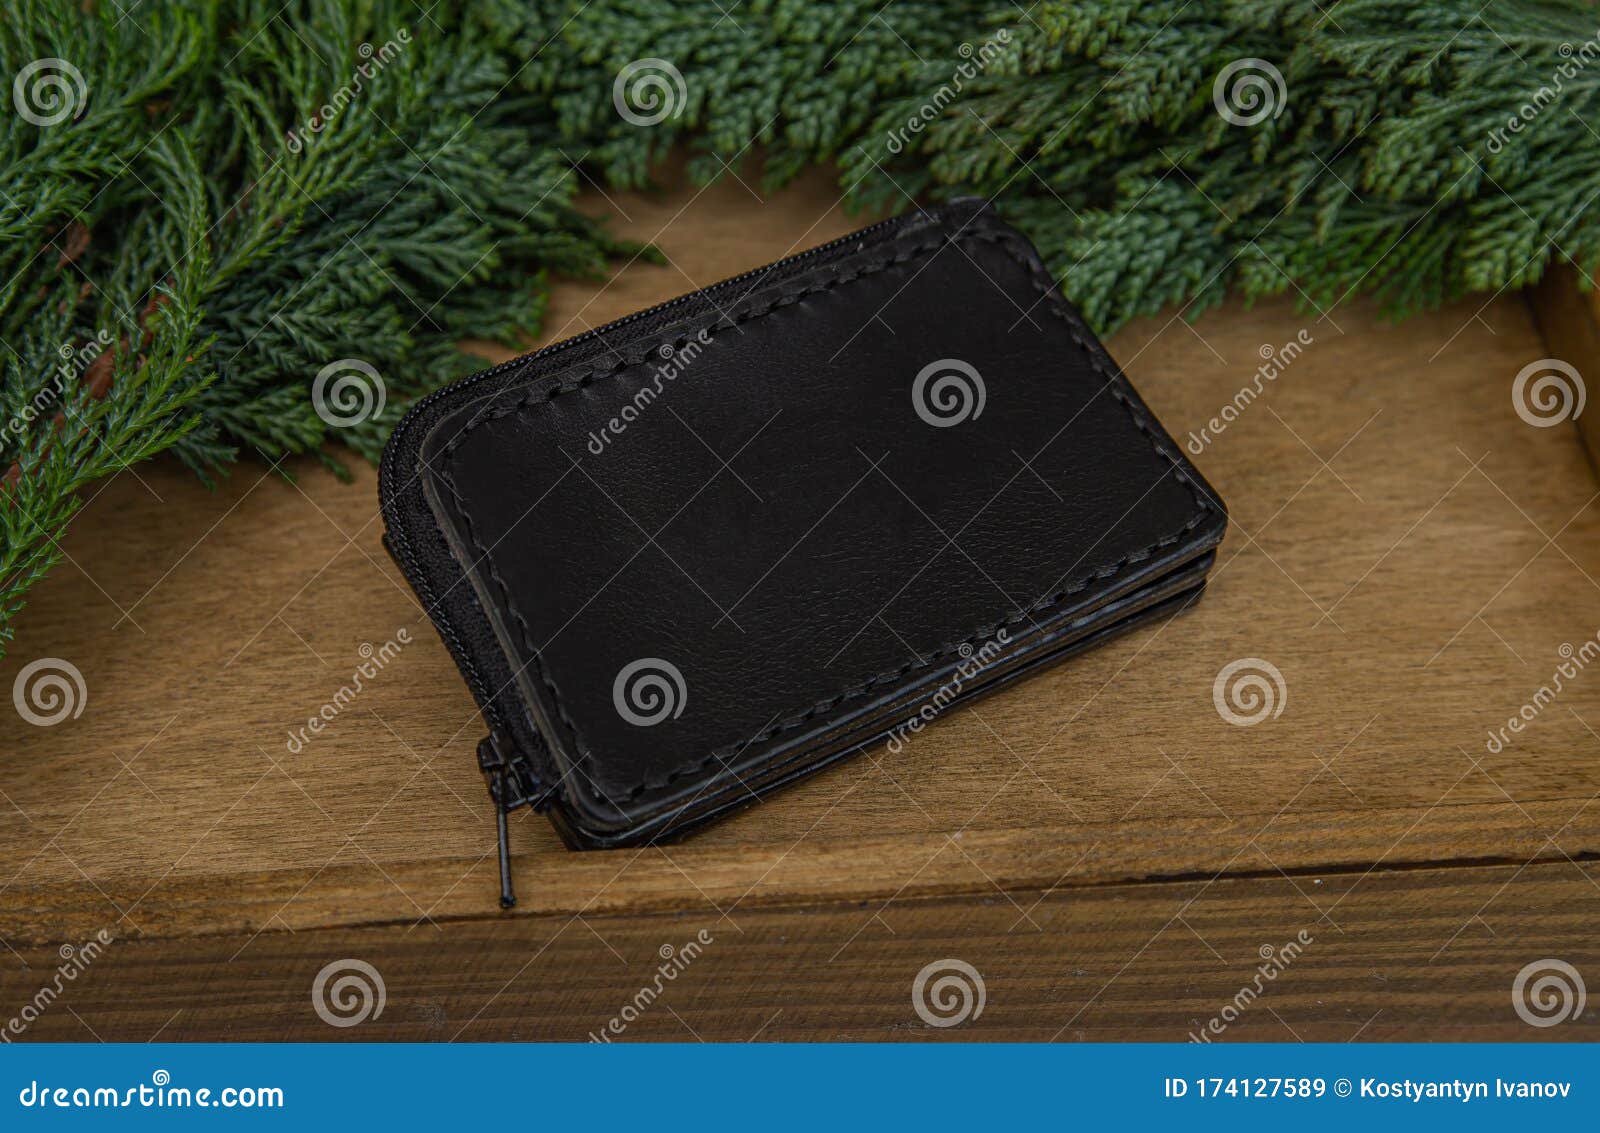 Black Real Leather Small Wallet for Coins and Credit Cards Stock Image ...